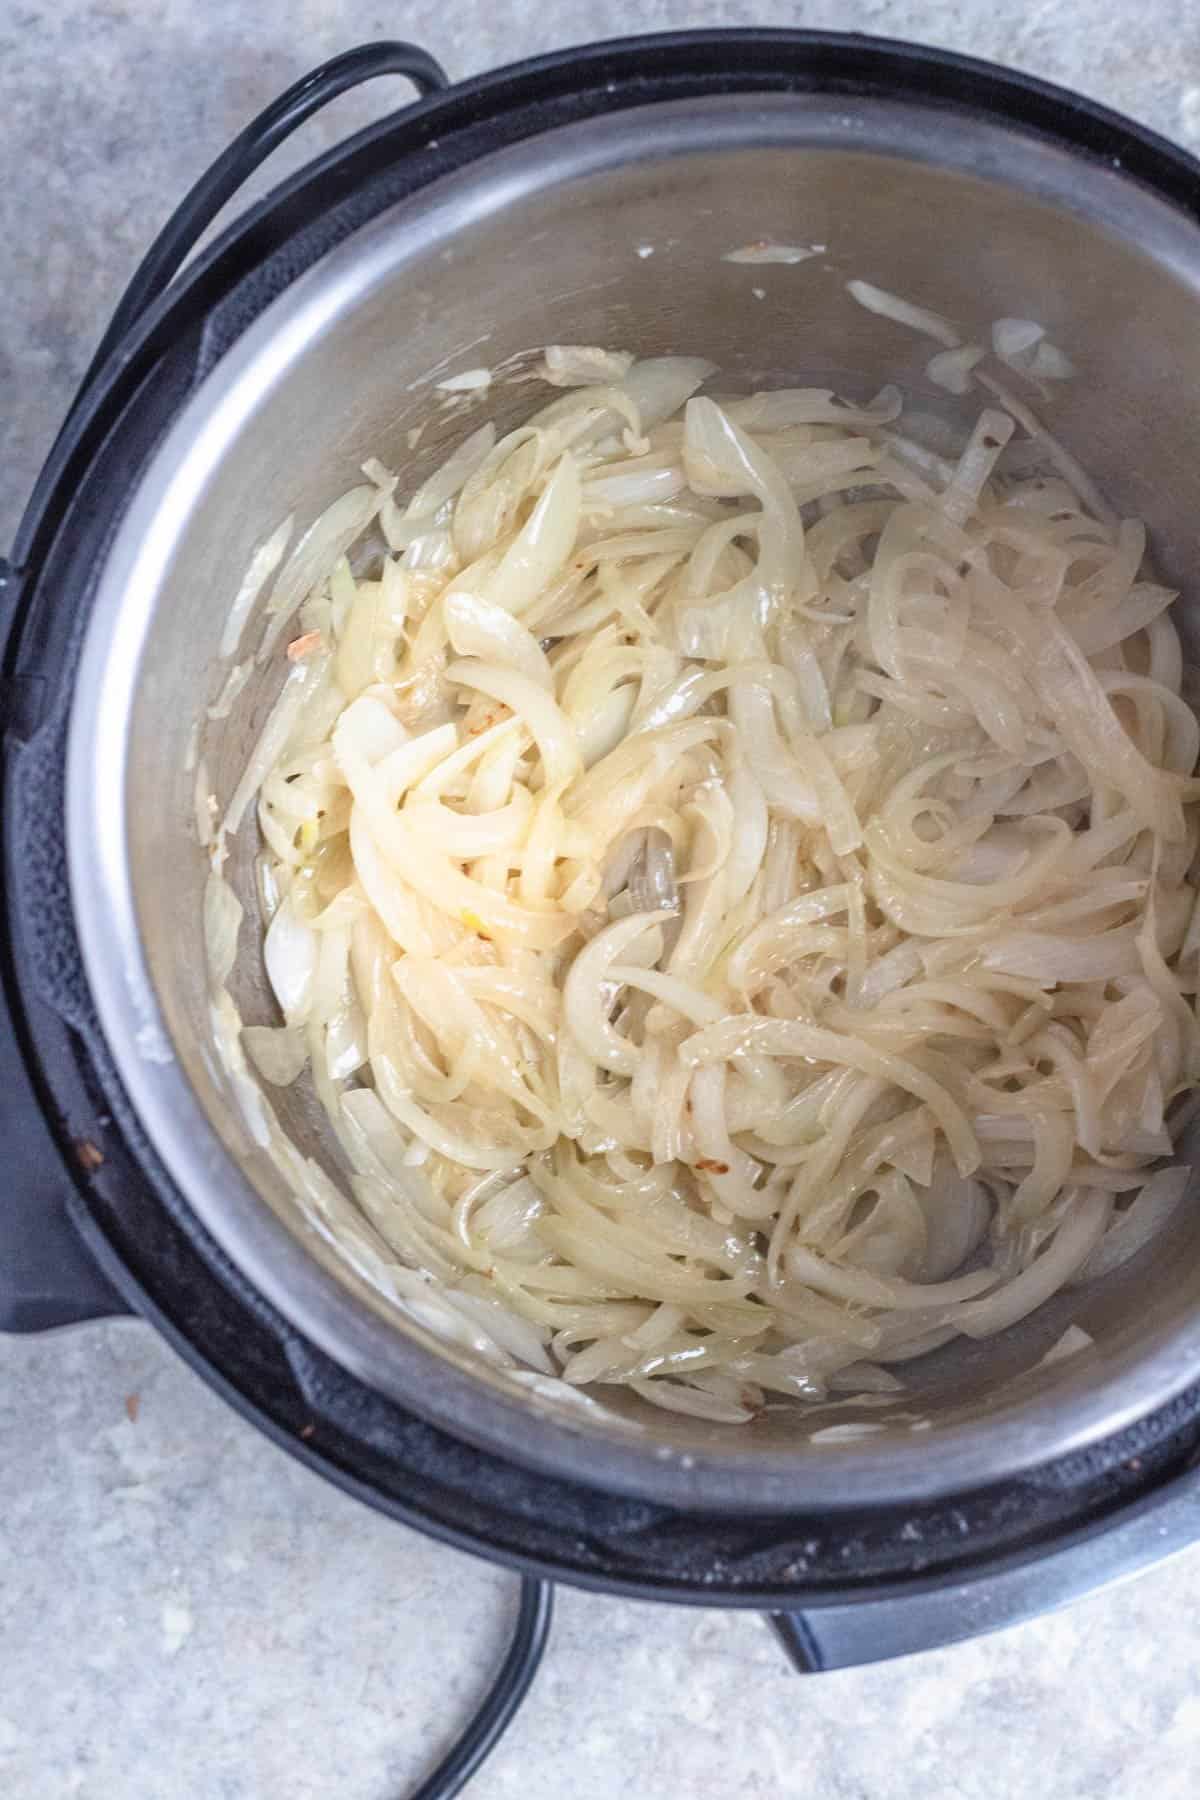 Caramelized sweet onions cooked down in the Instant Pot.